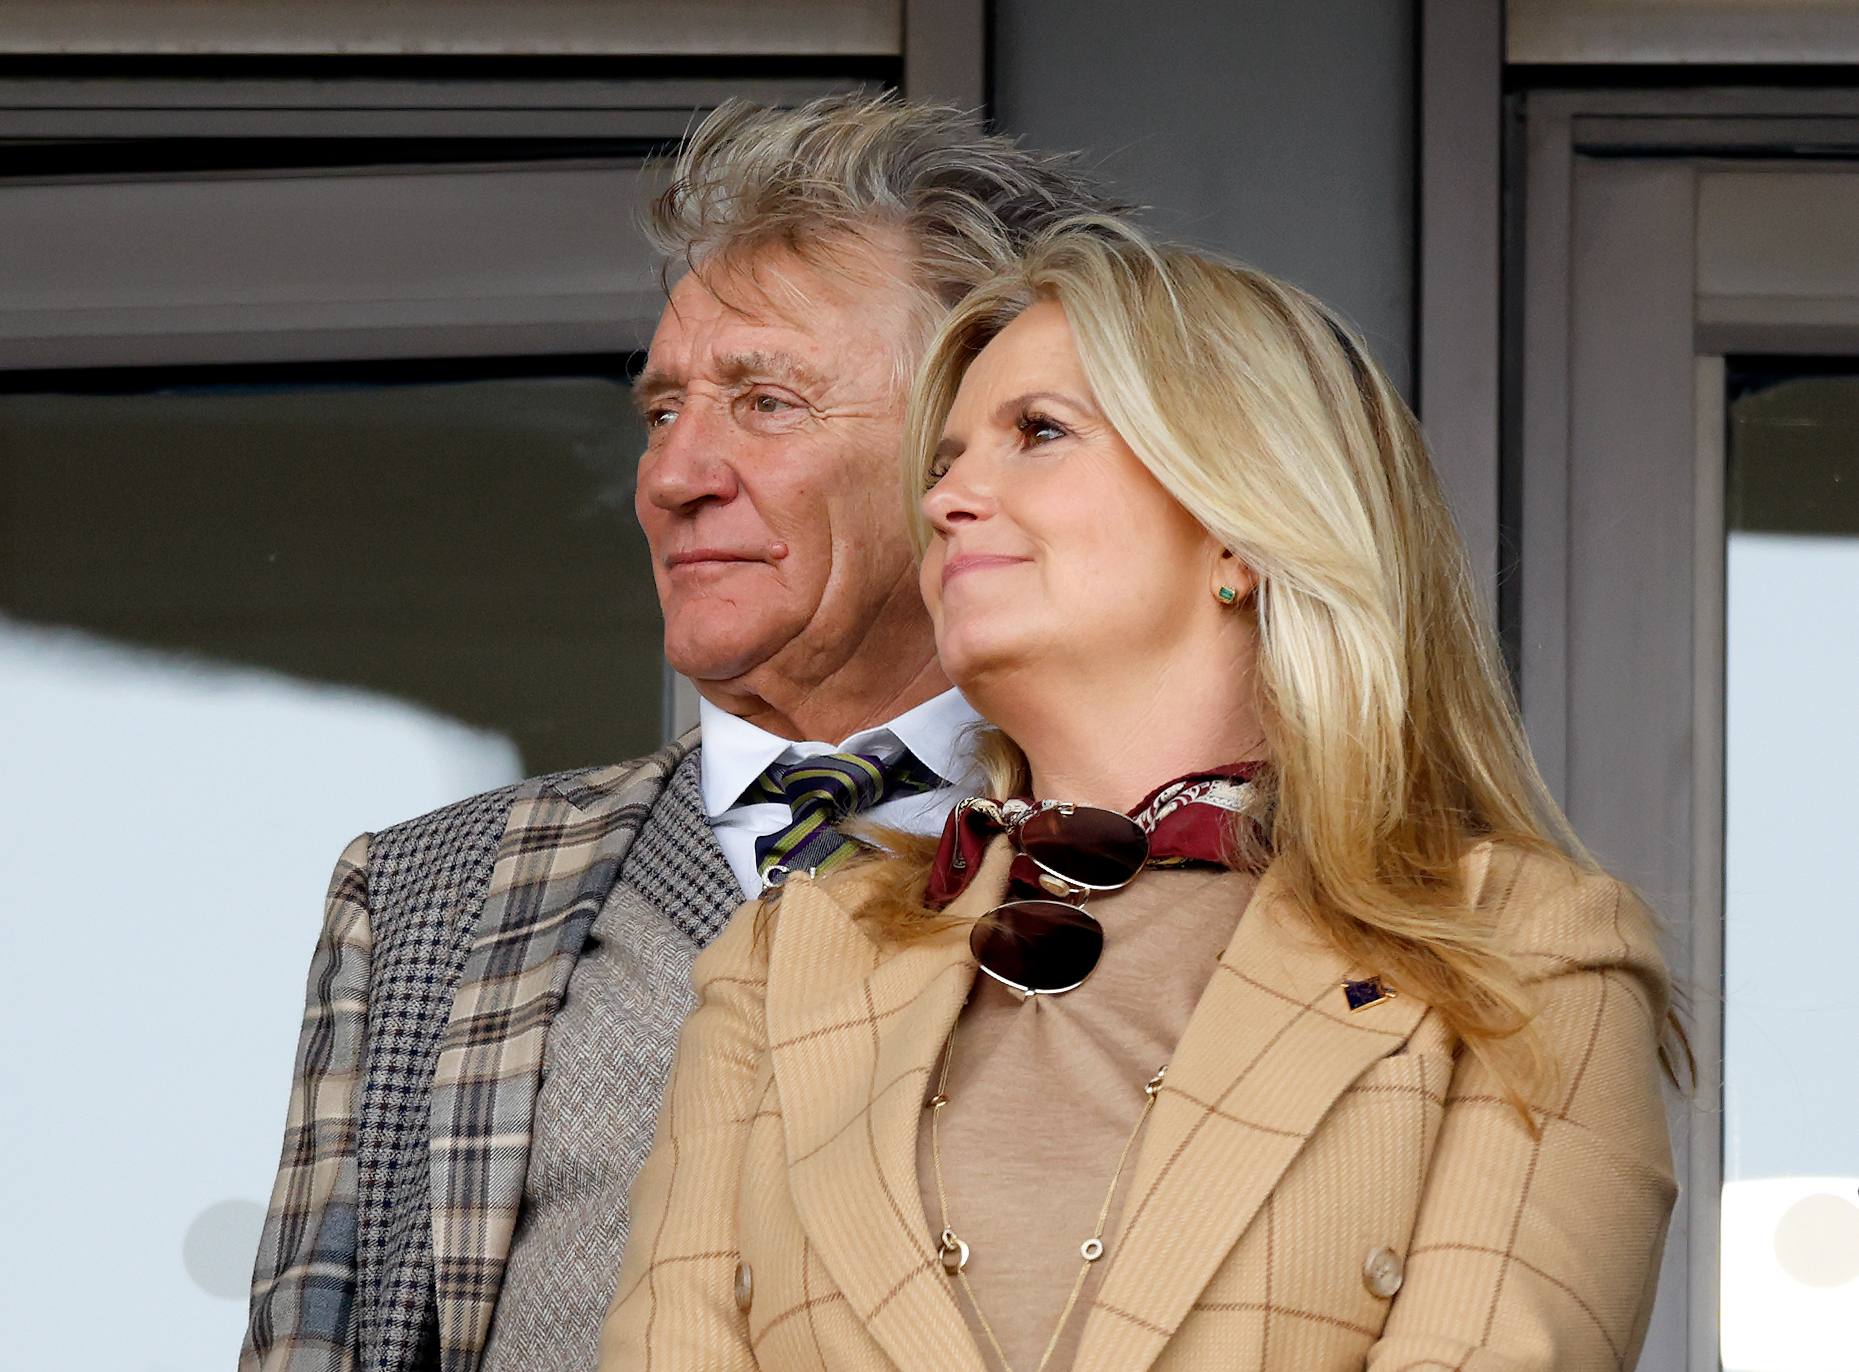 Sir Rod Stewart and Penny Lancaster in Cheltenham, England on March 15, 2022 | Source: Getty Images